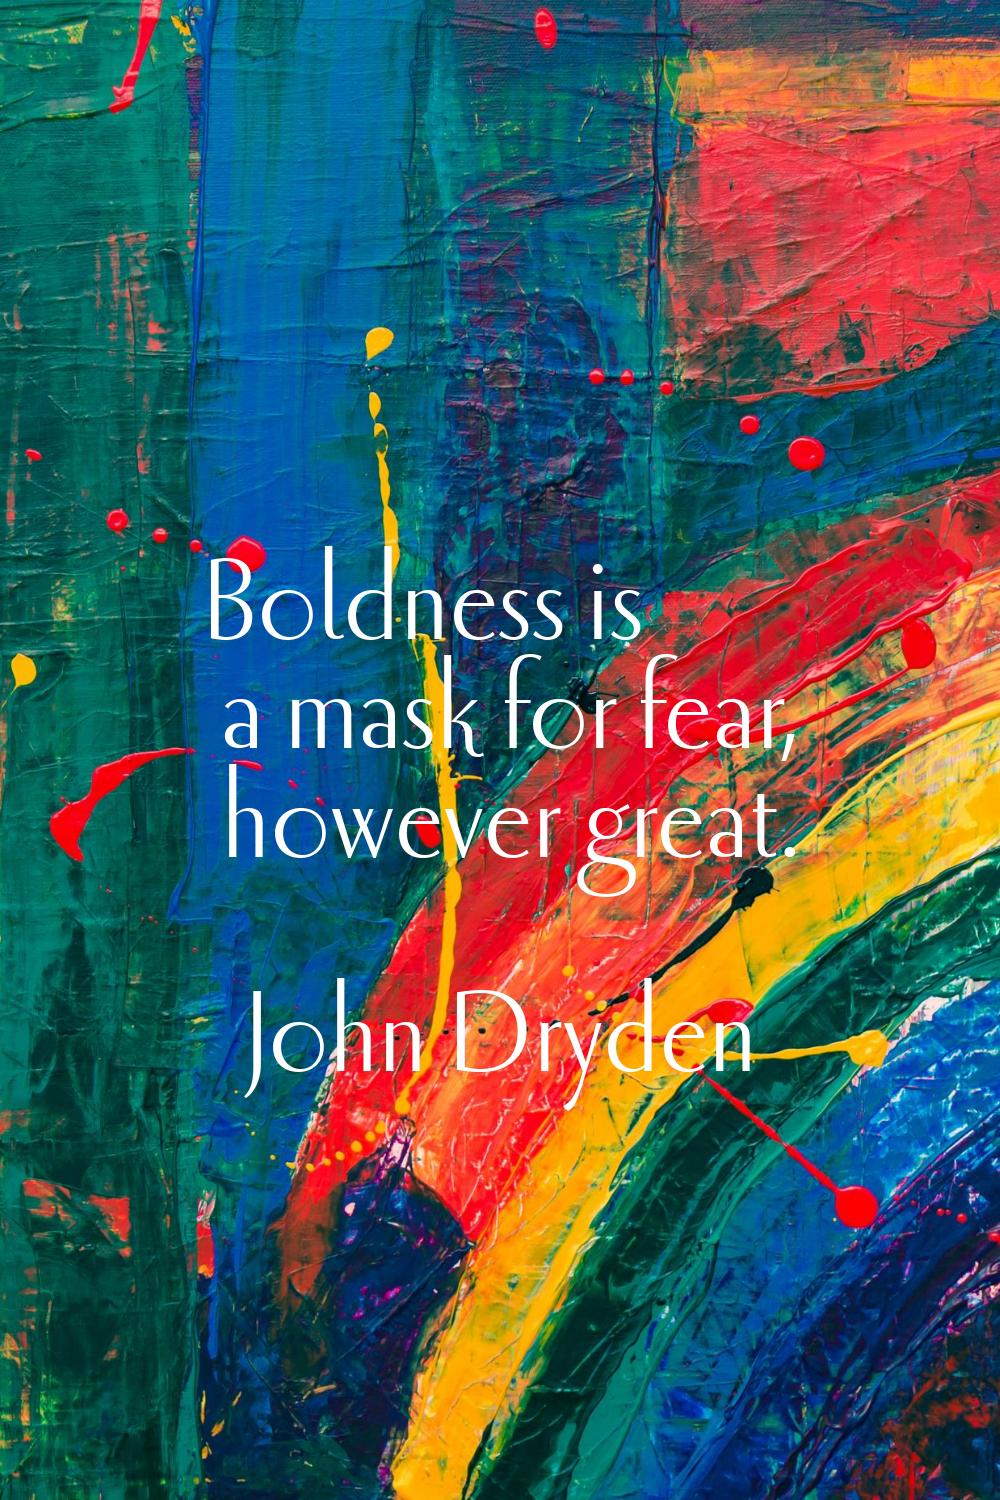 Boldness is a mask for fear, however great.